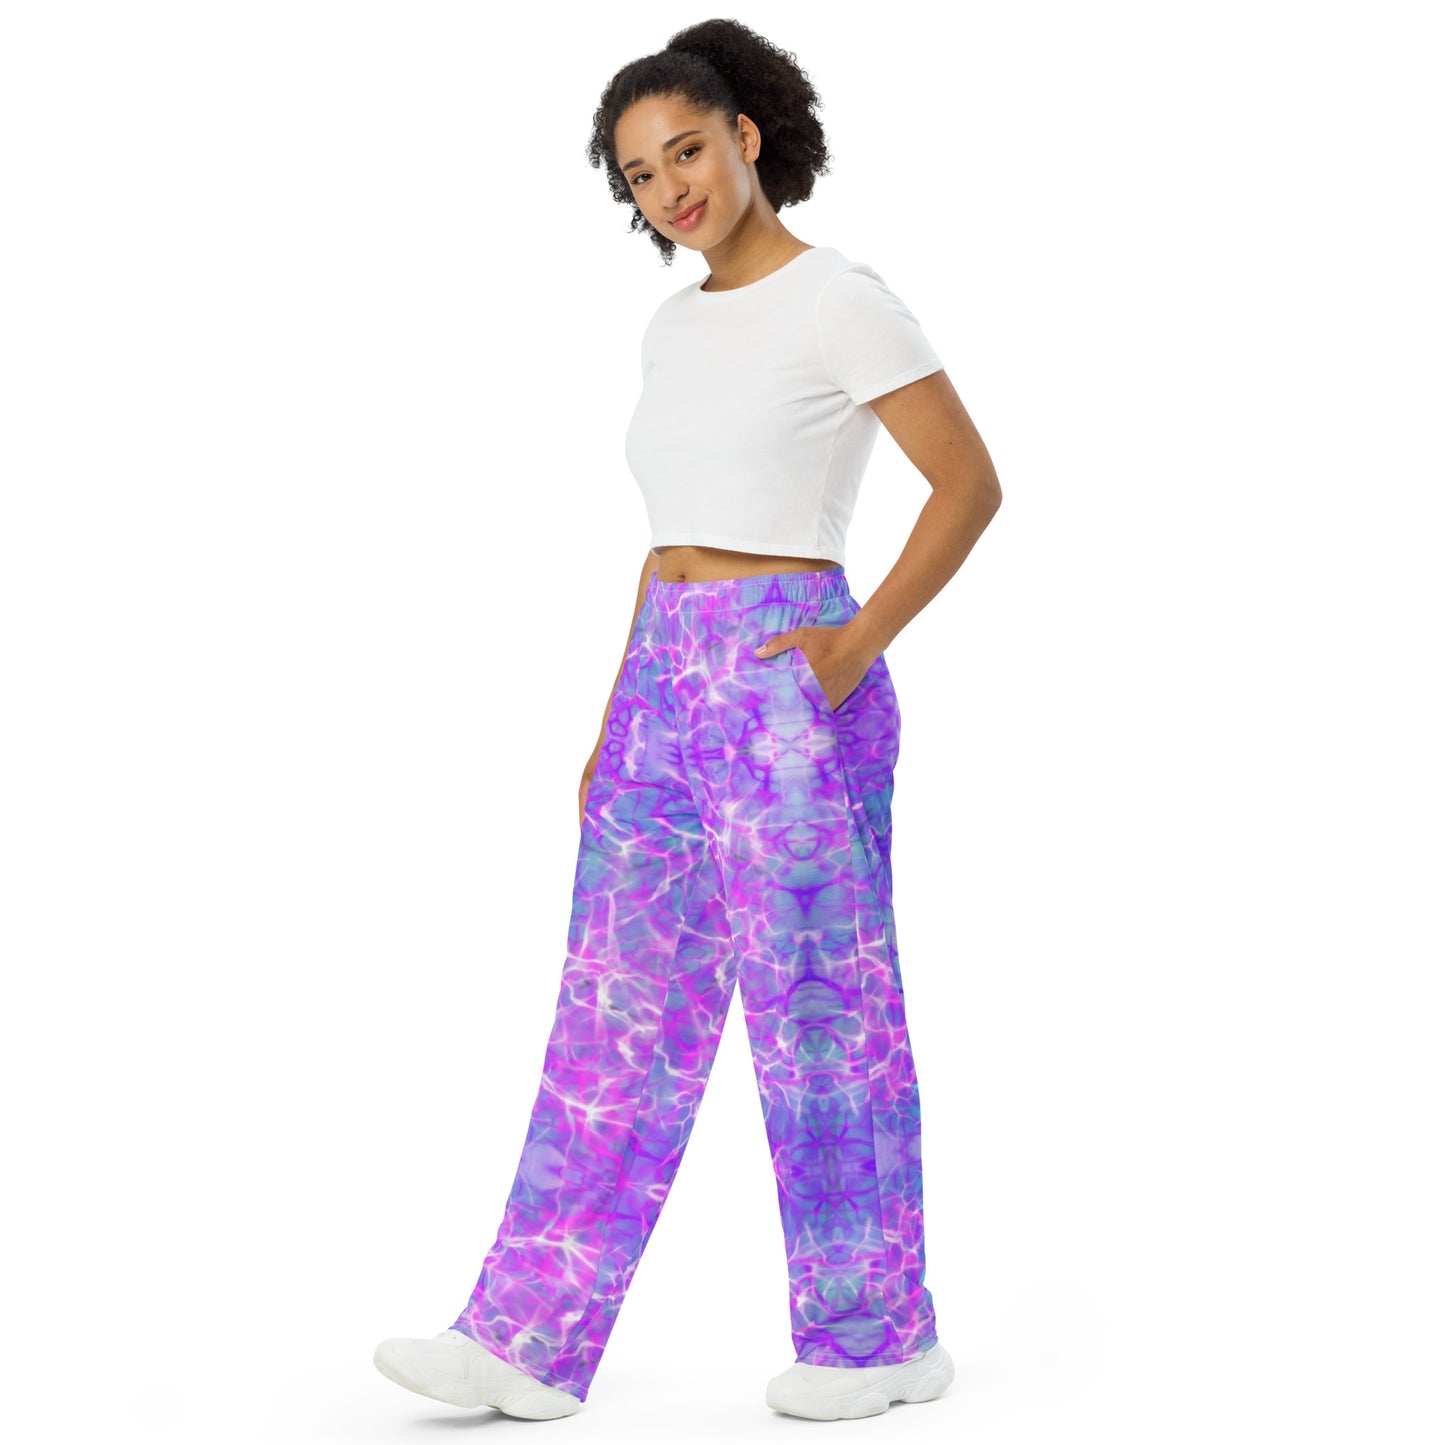 Purple Water Dreaming All-over print unisex wide-leg pants